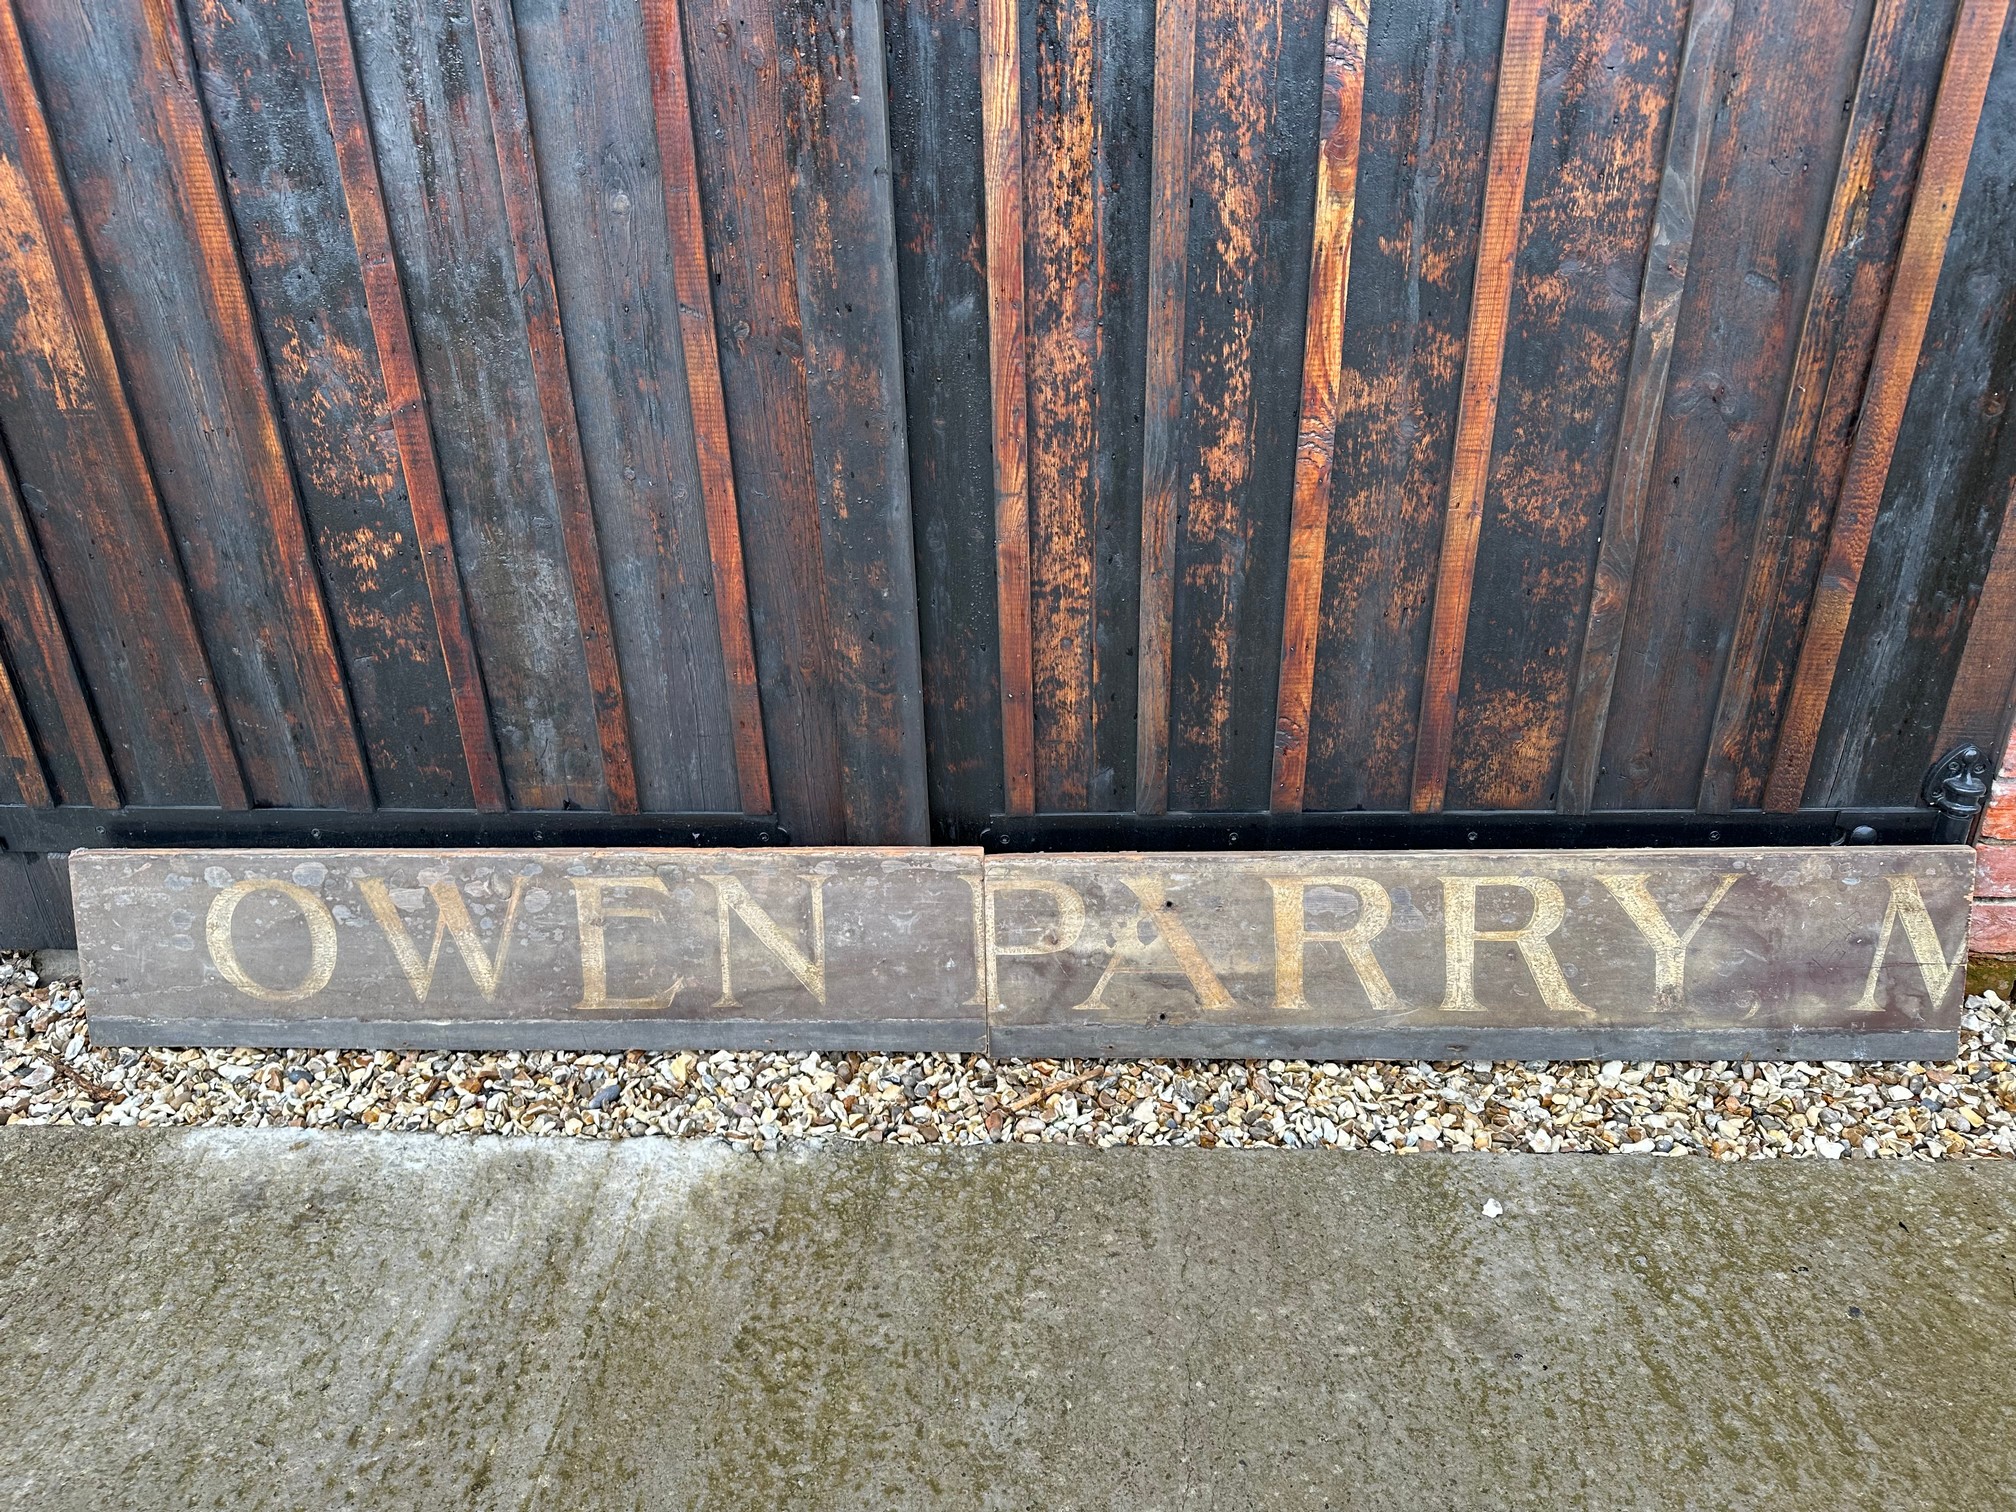 Two parts of a wooden hand painted Welsh advertising sign 'Owen Parry', 48 x 10 1/2" each.